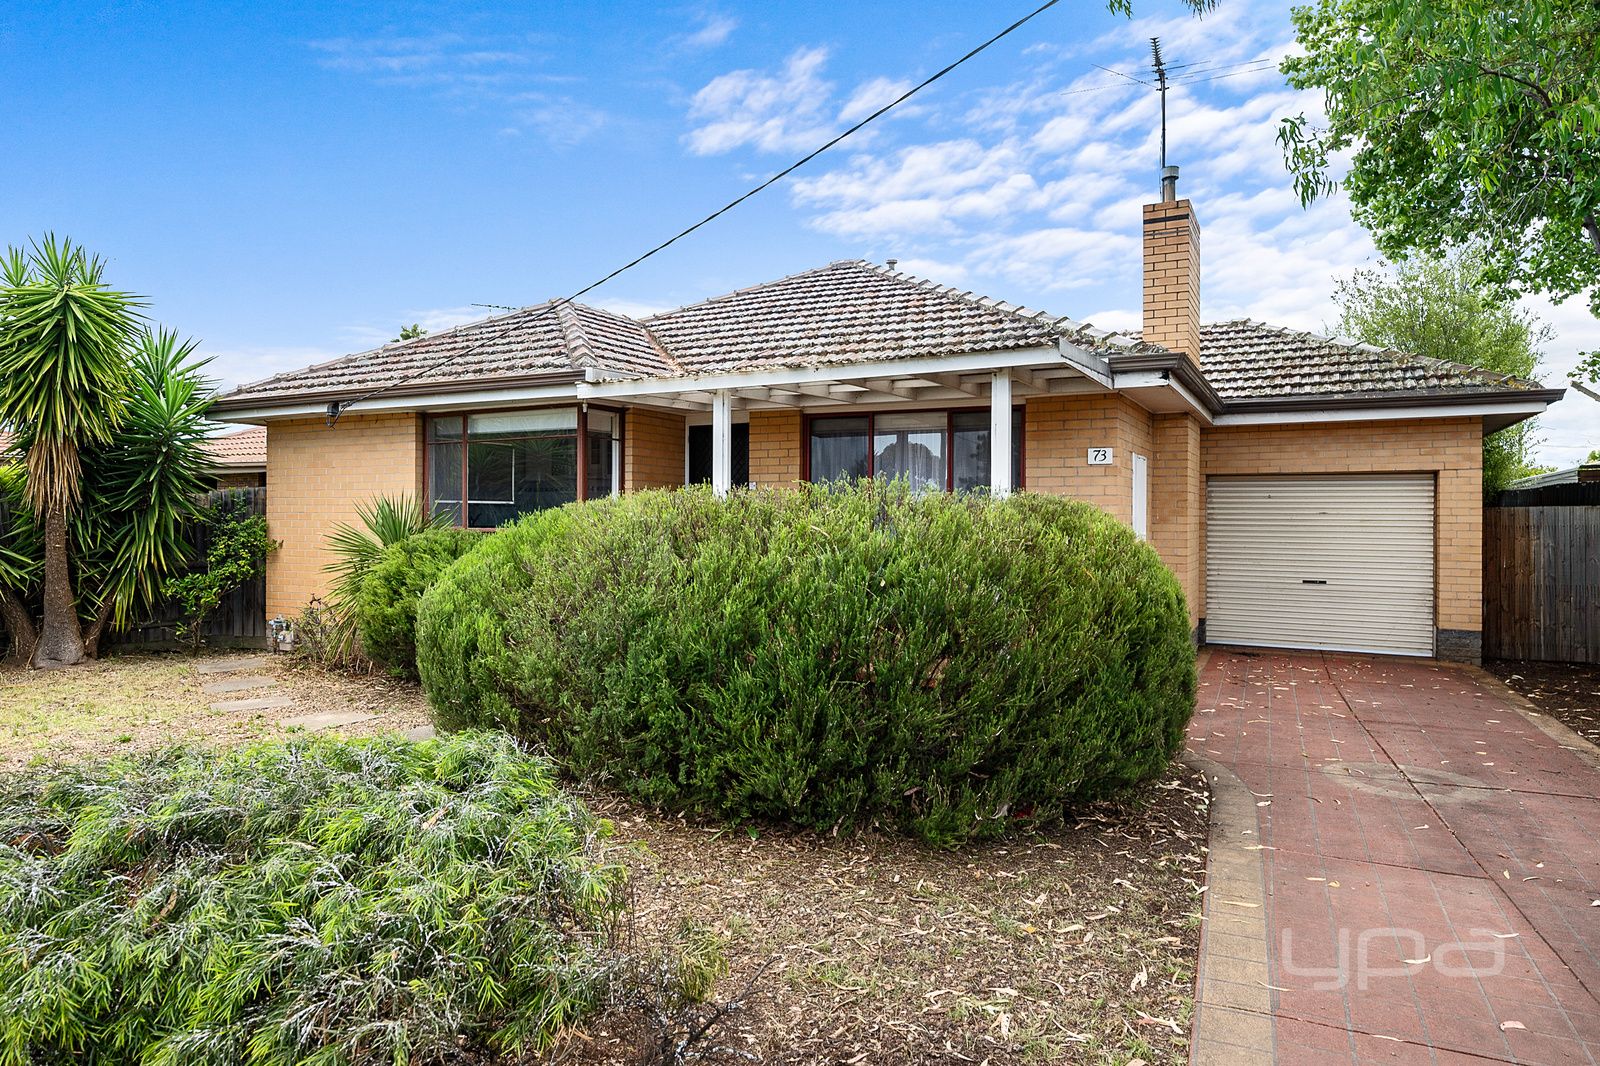 2 bedrooms House in 73 Station Road MELTON SOUTH VIC, 3338